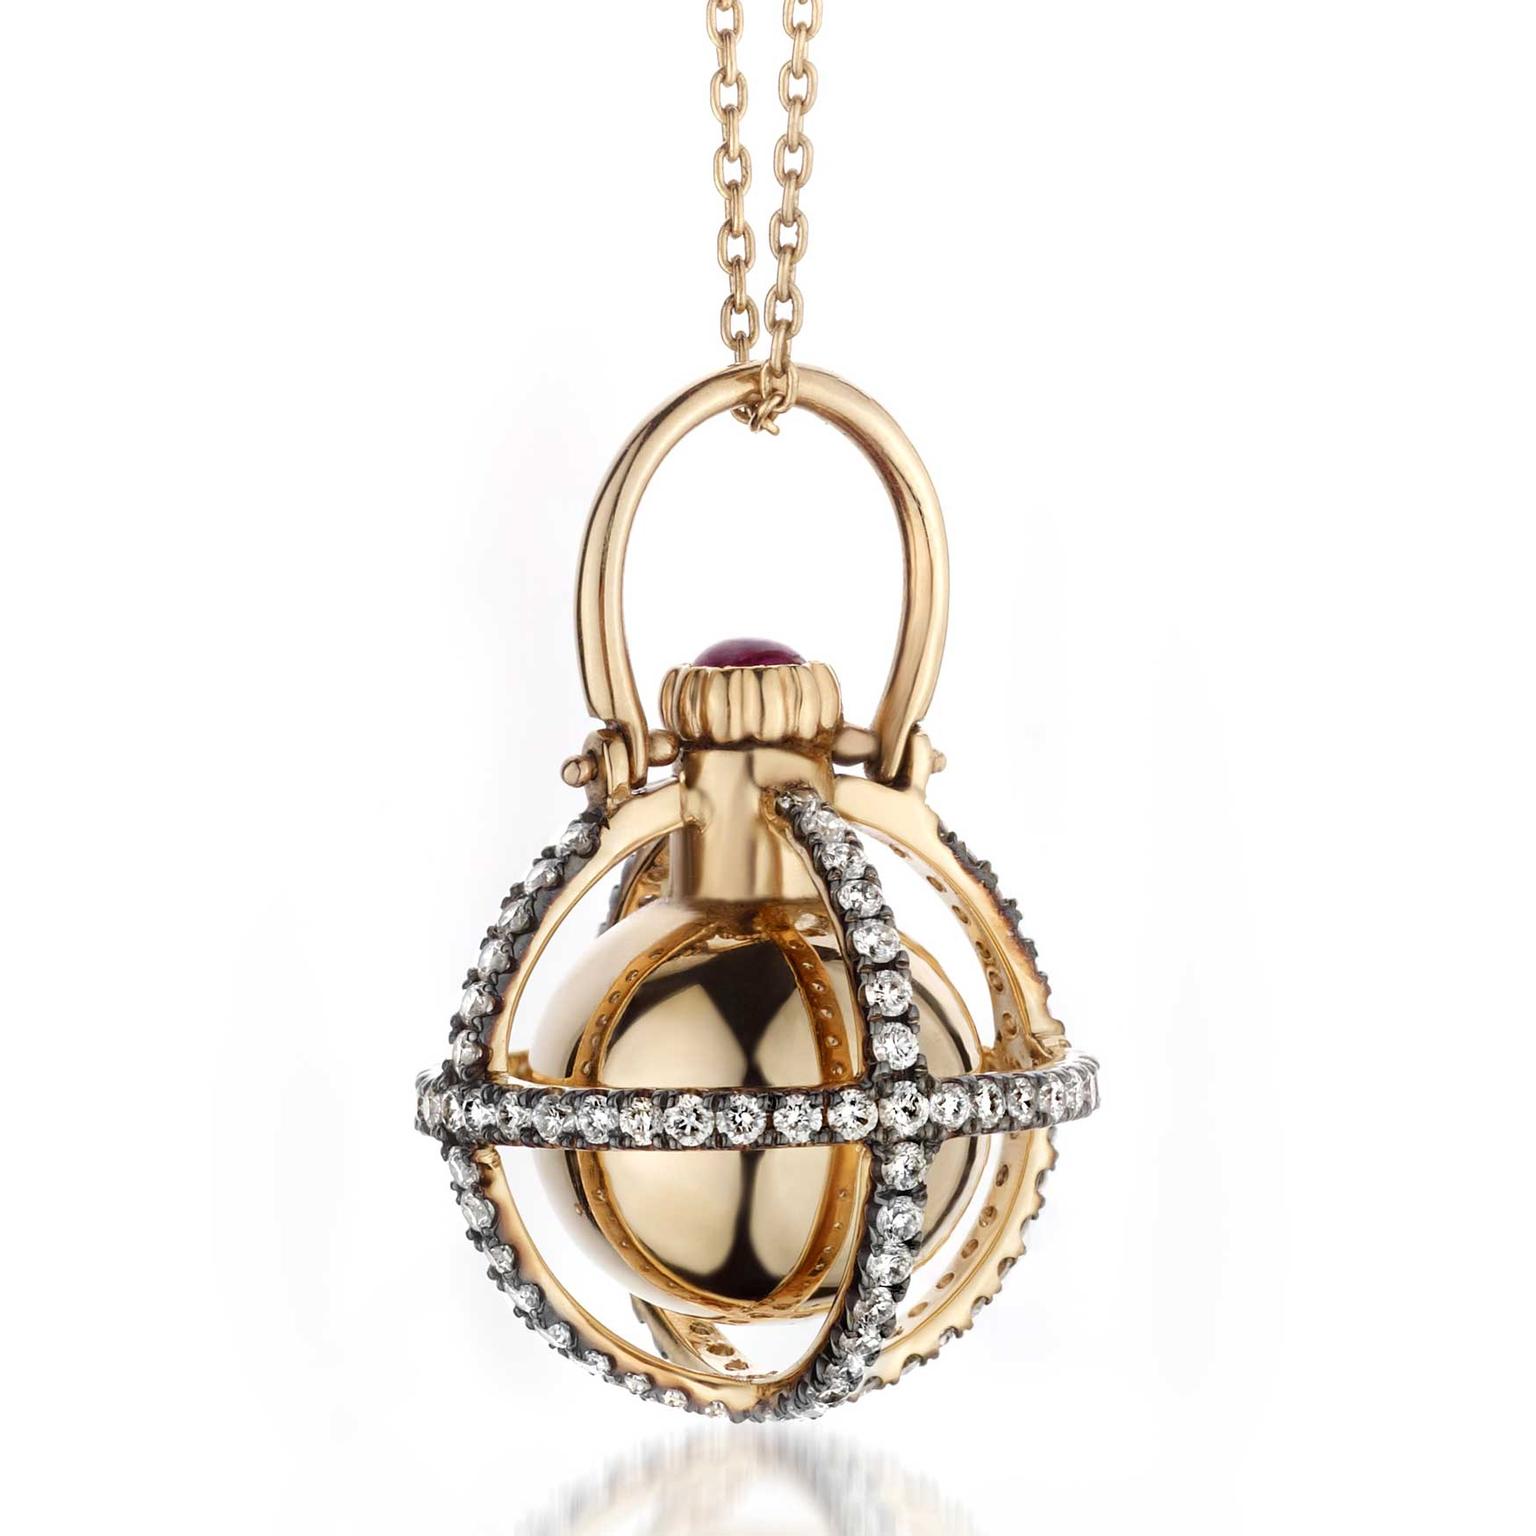 Melie perfume pendant in gold